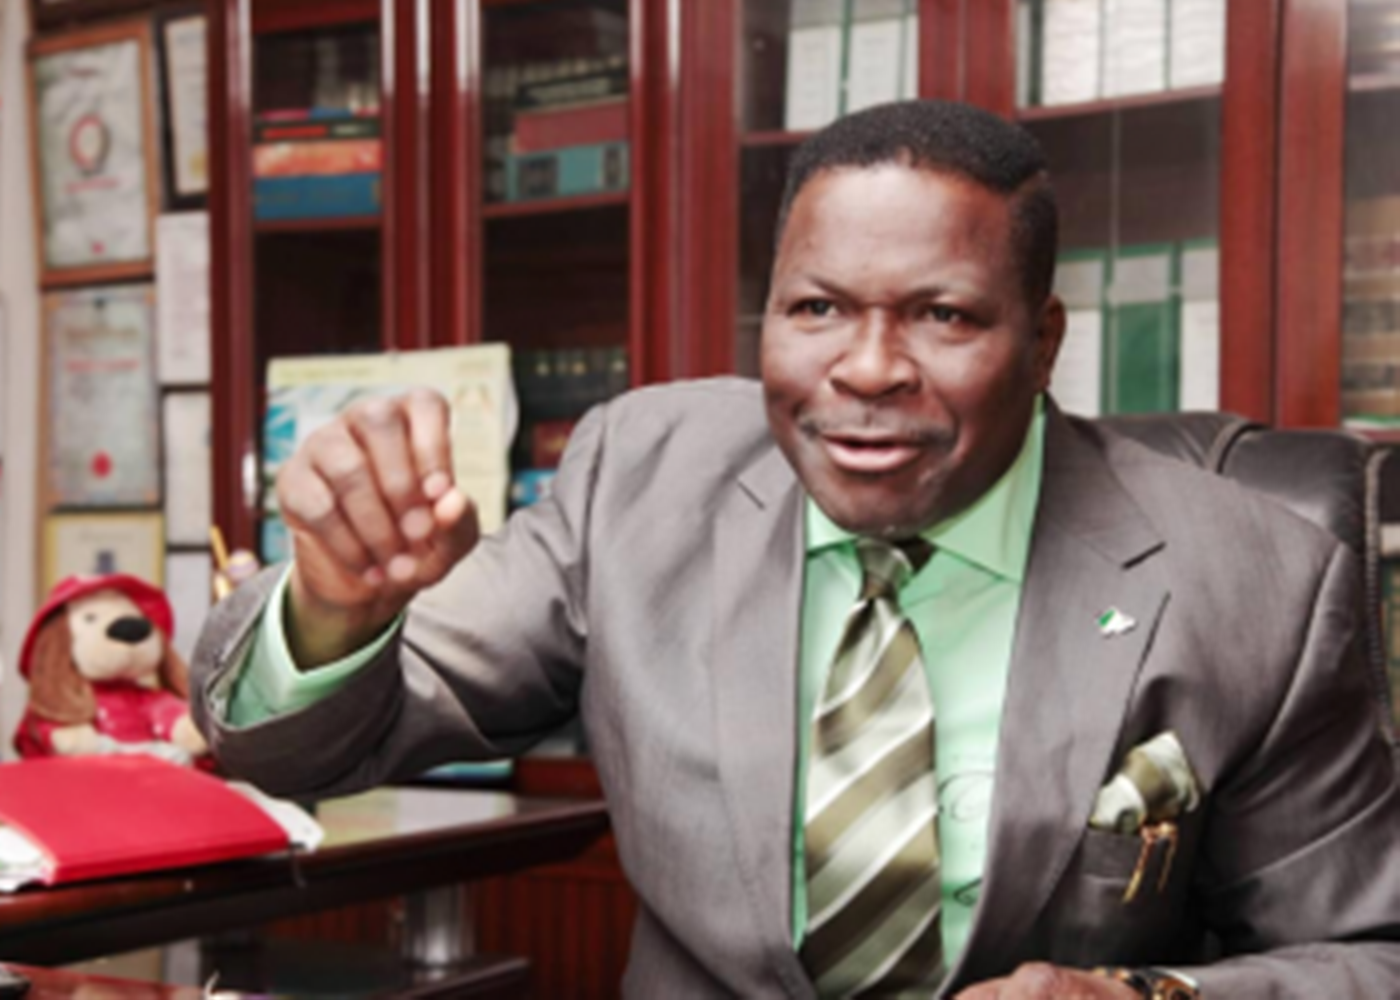 Supreme Court is final court, Ozekhome reacts to Uzodinma victory